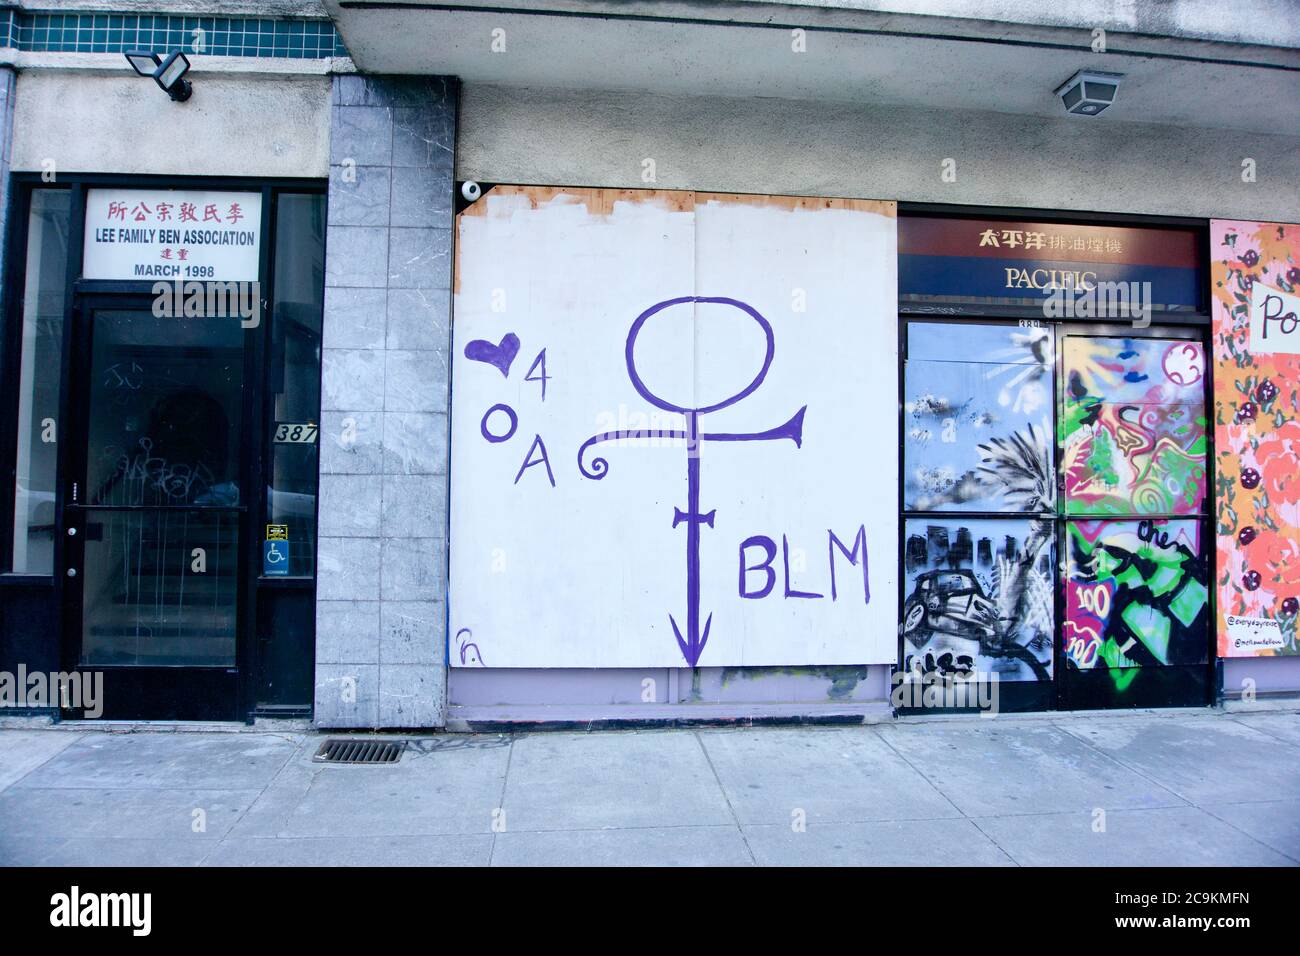 Prince love symbol painted on boarded storefront that reads BLM in honor of George Floyd and Black Lives Matter protests. Chinatown, Oakland, CA Stock Photo